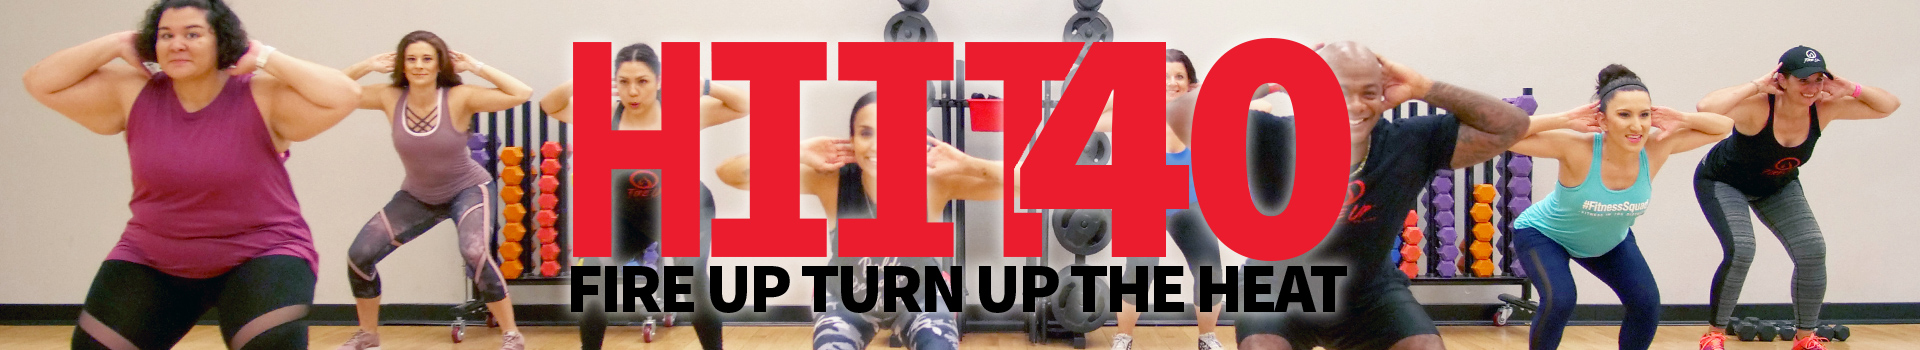 HIIT 40: Fire Up Turn Up The Heat